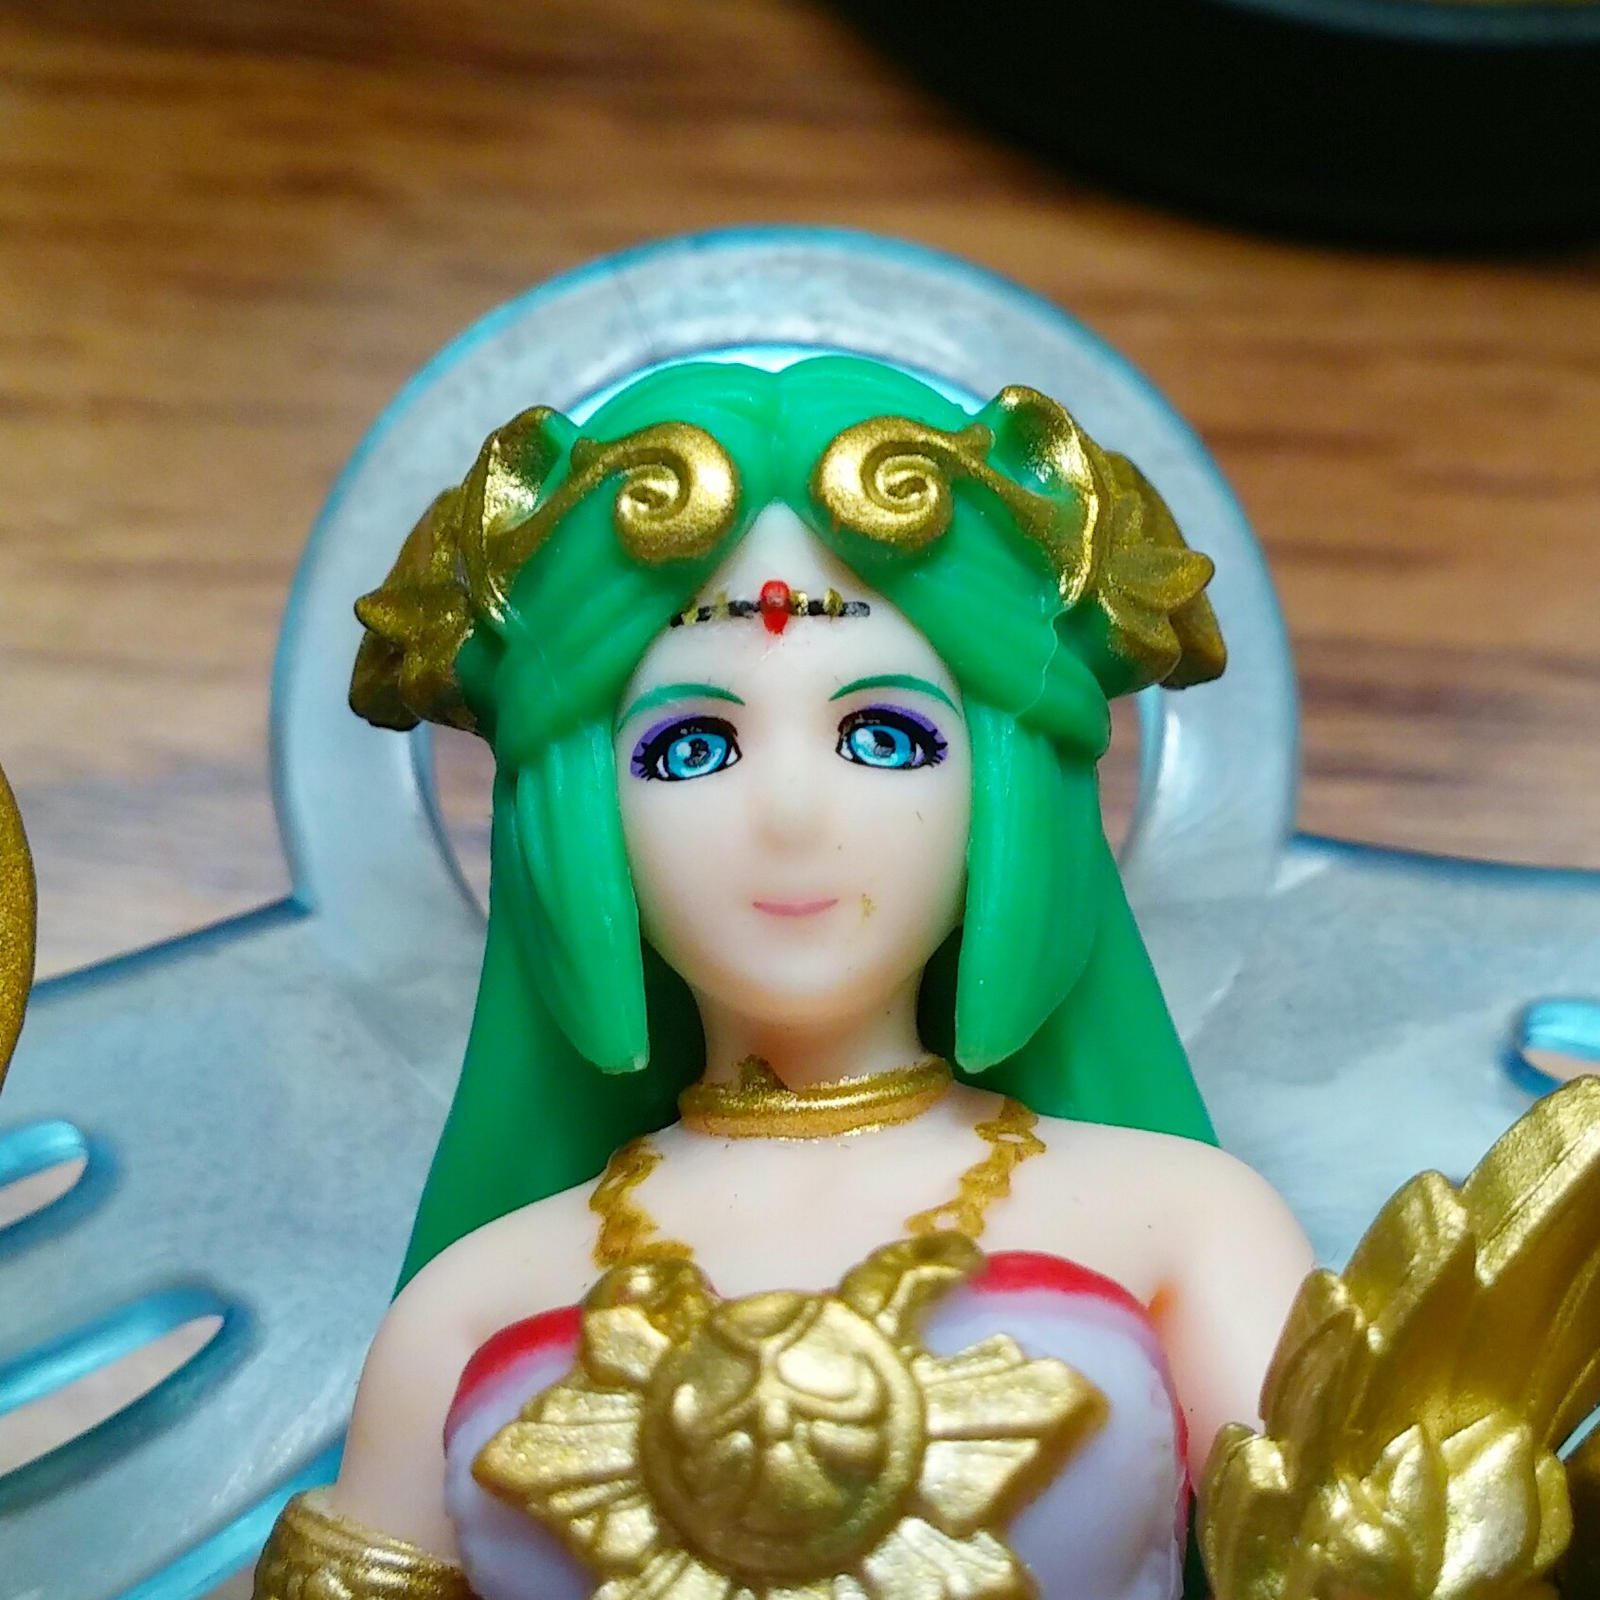 golden_dimple_palutena_amiibo_by_tomm2638-d932wt9.jpg